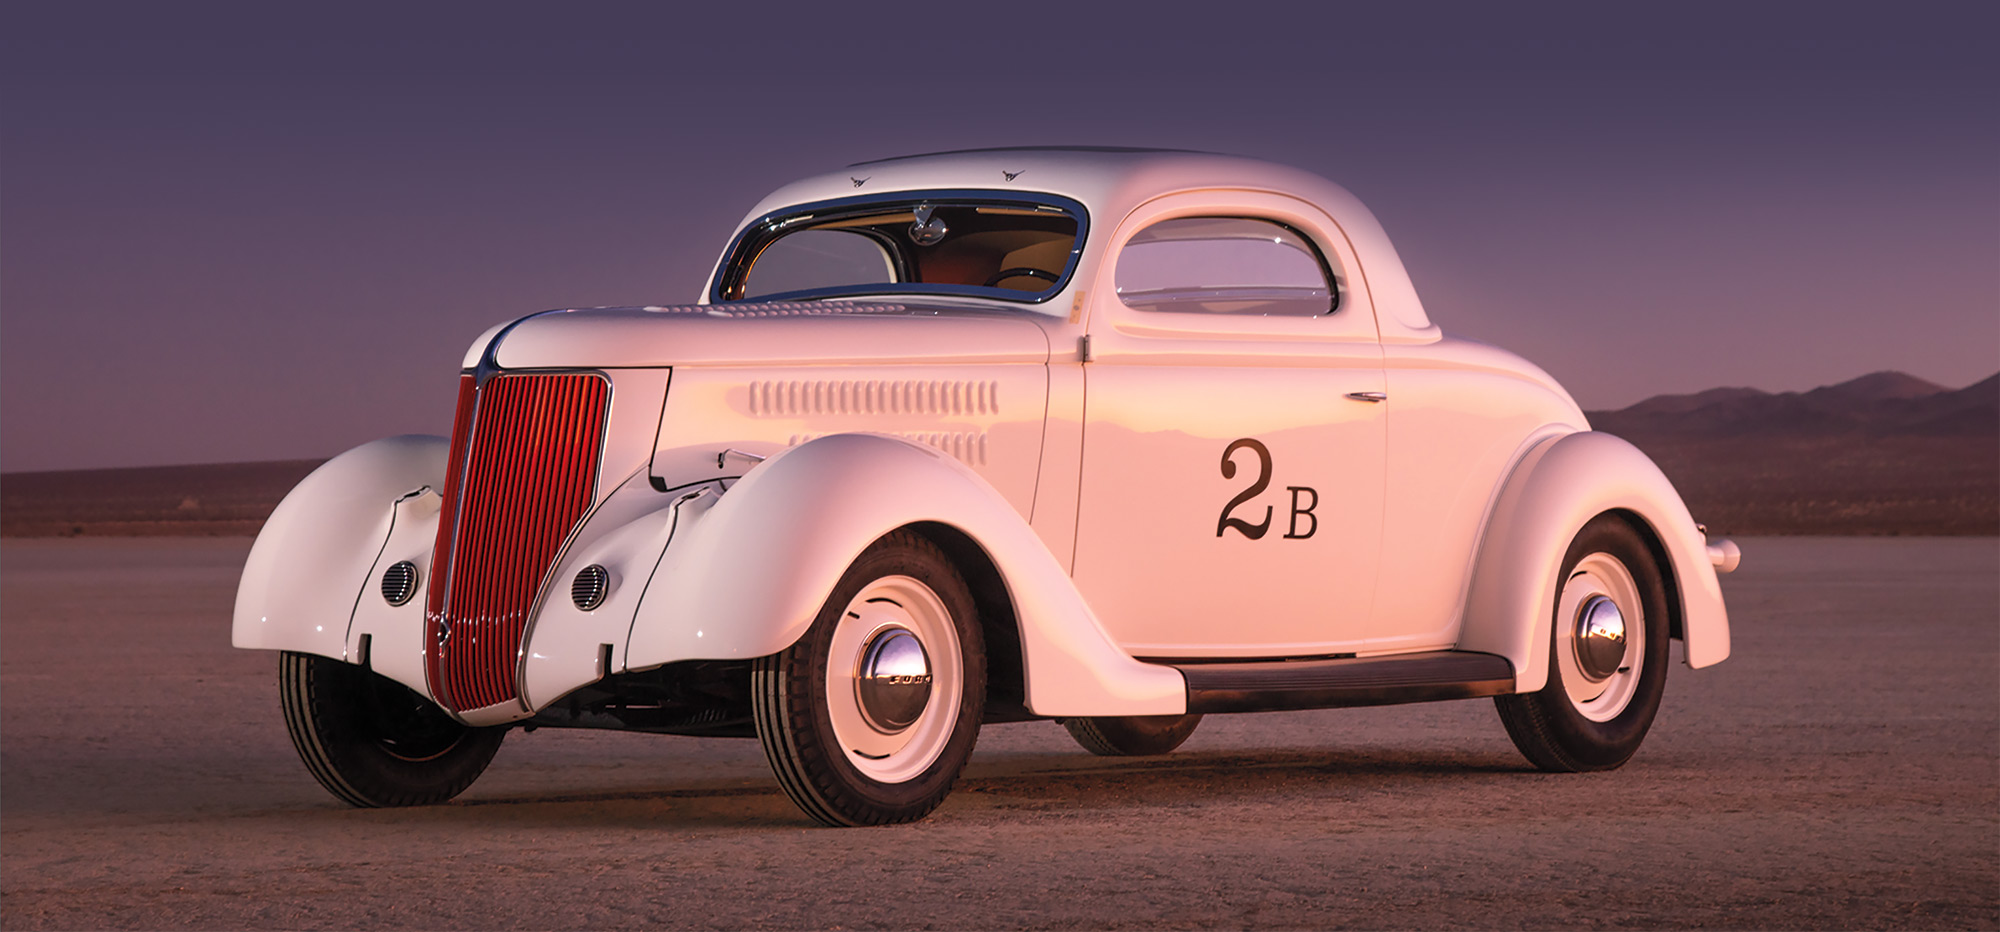 1936 Coupe with a racing trim for the first time in 70 years